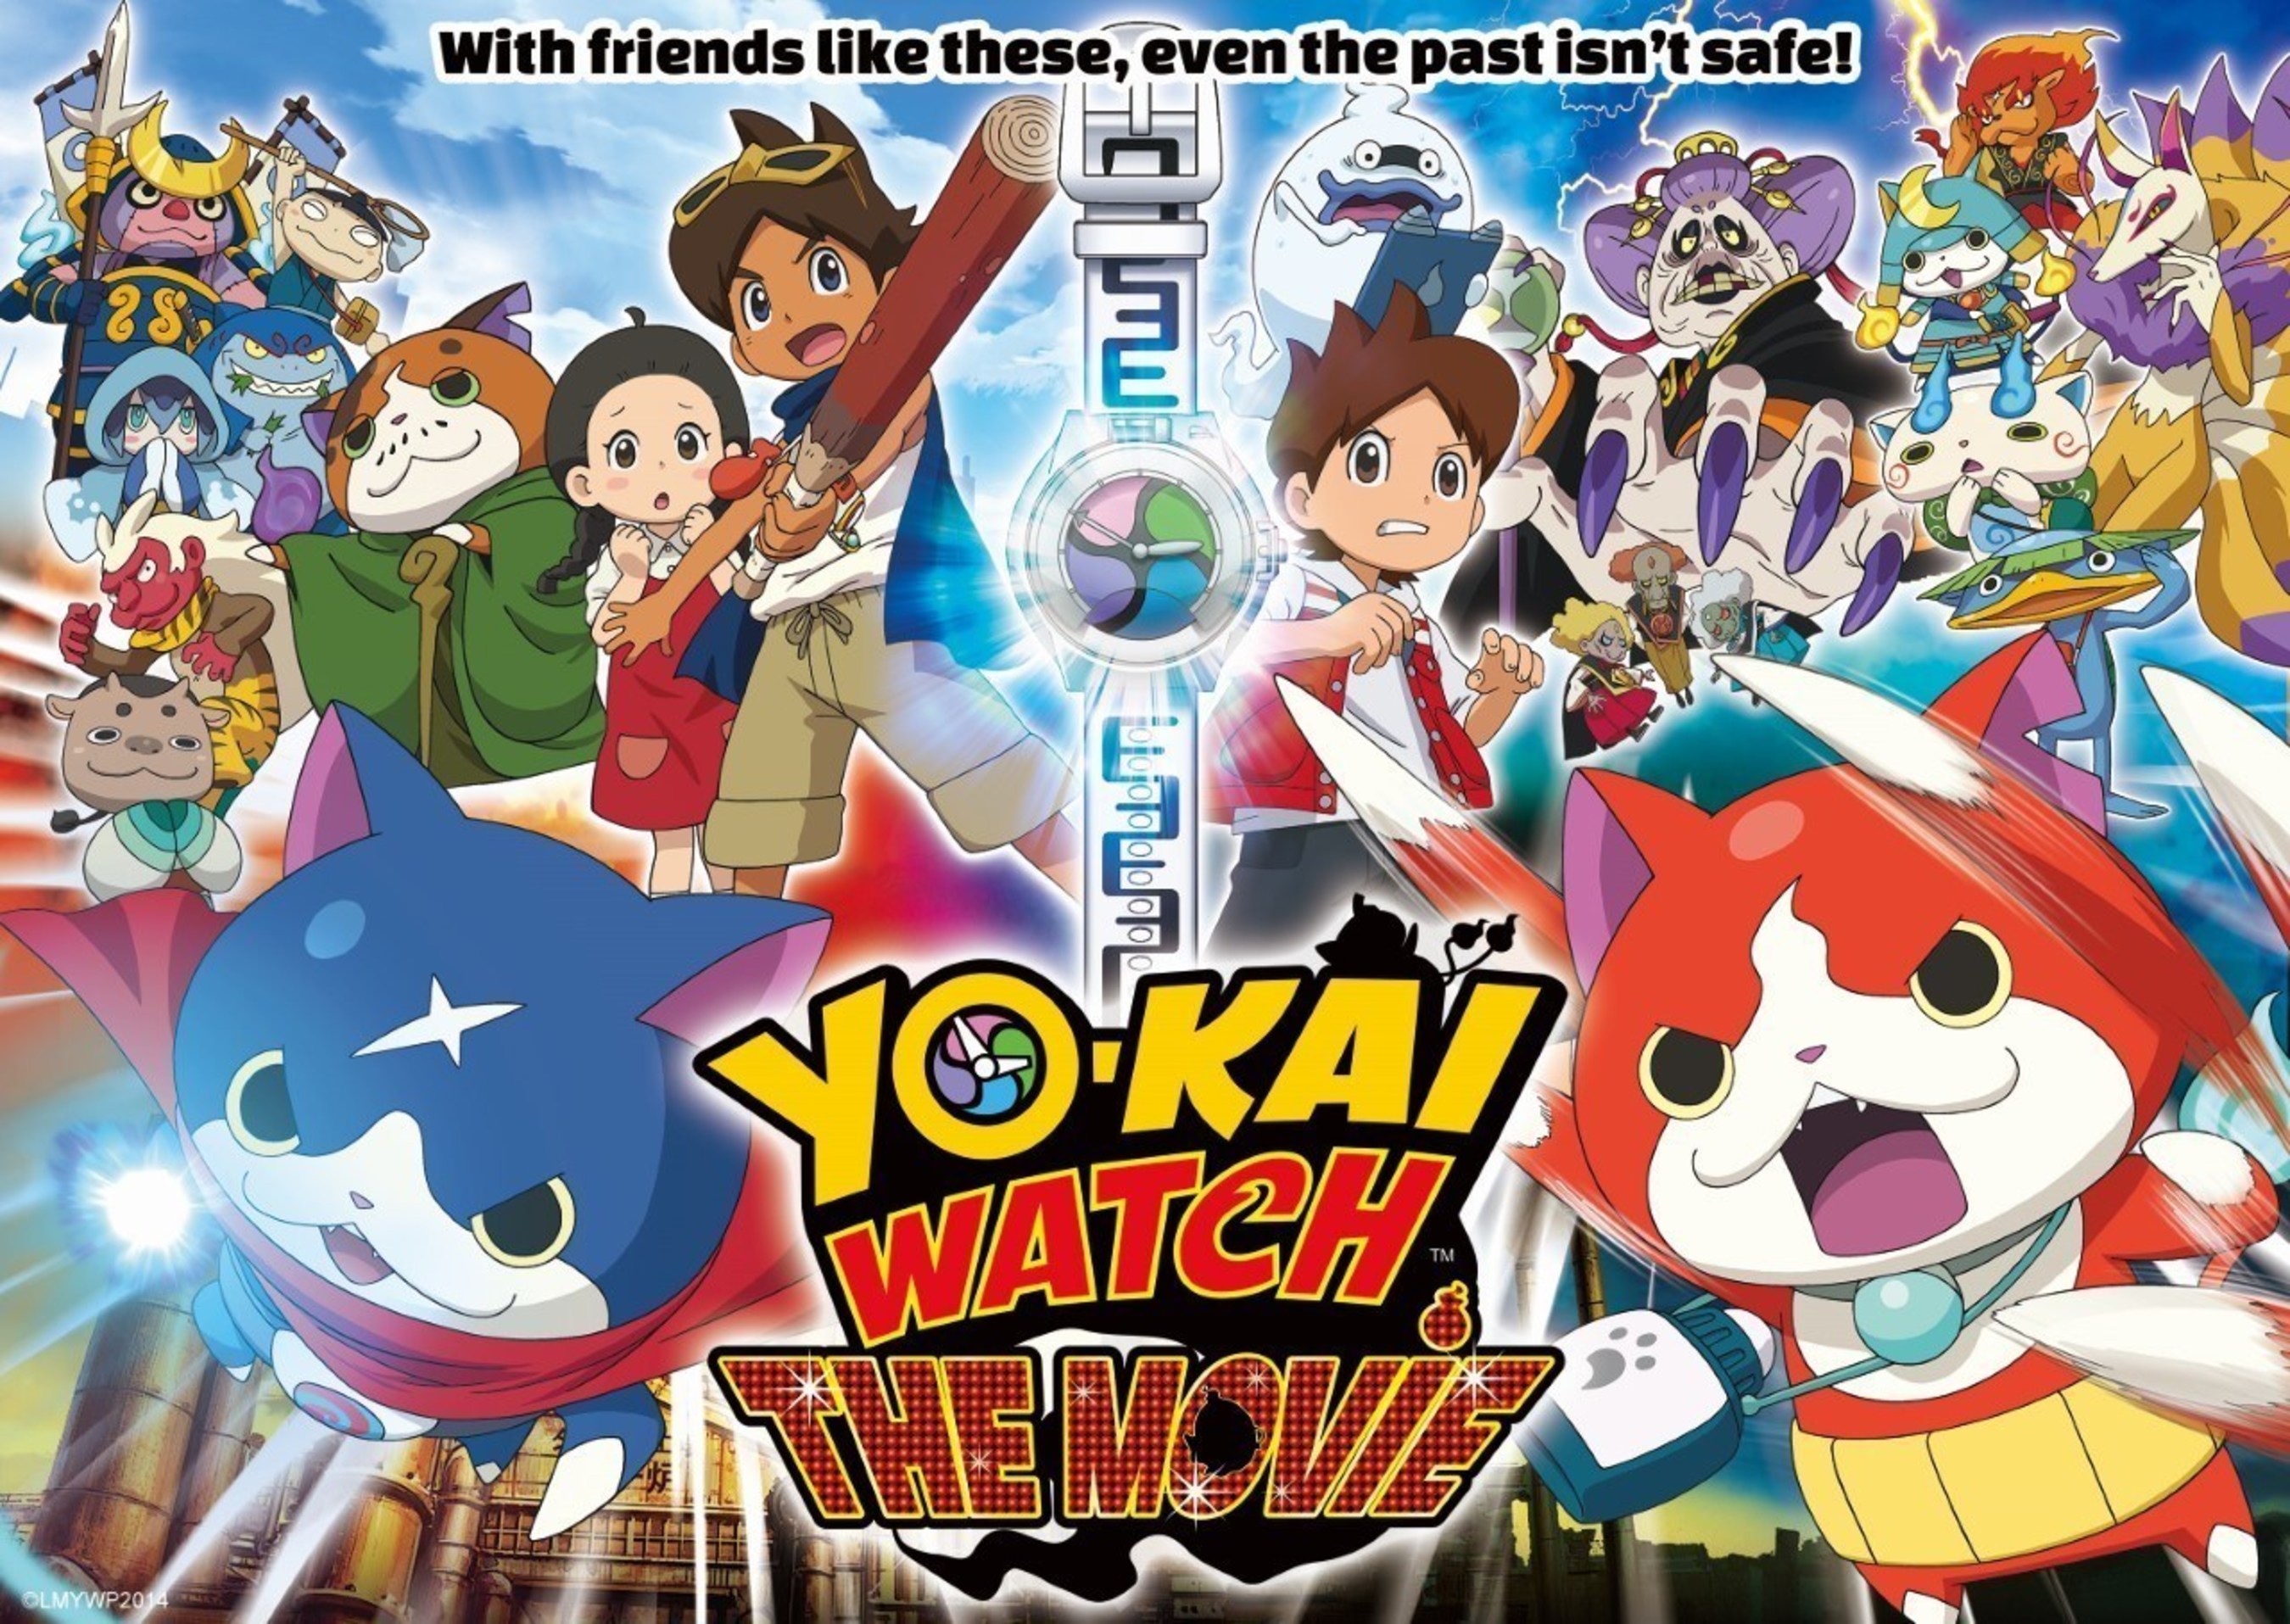 YO-KAI WATCH: THE MOVIE EVENT Takes Place in North American Movie Theaters on October 15 Only